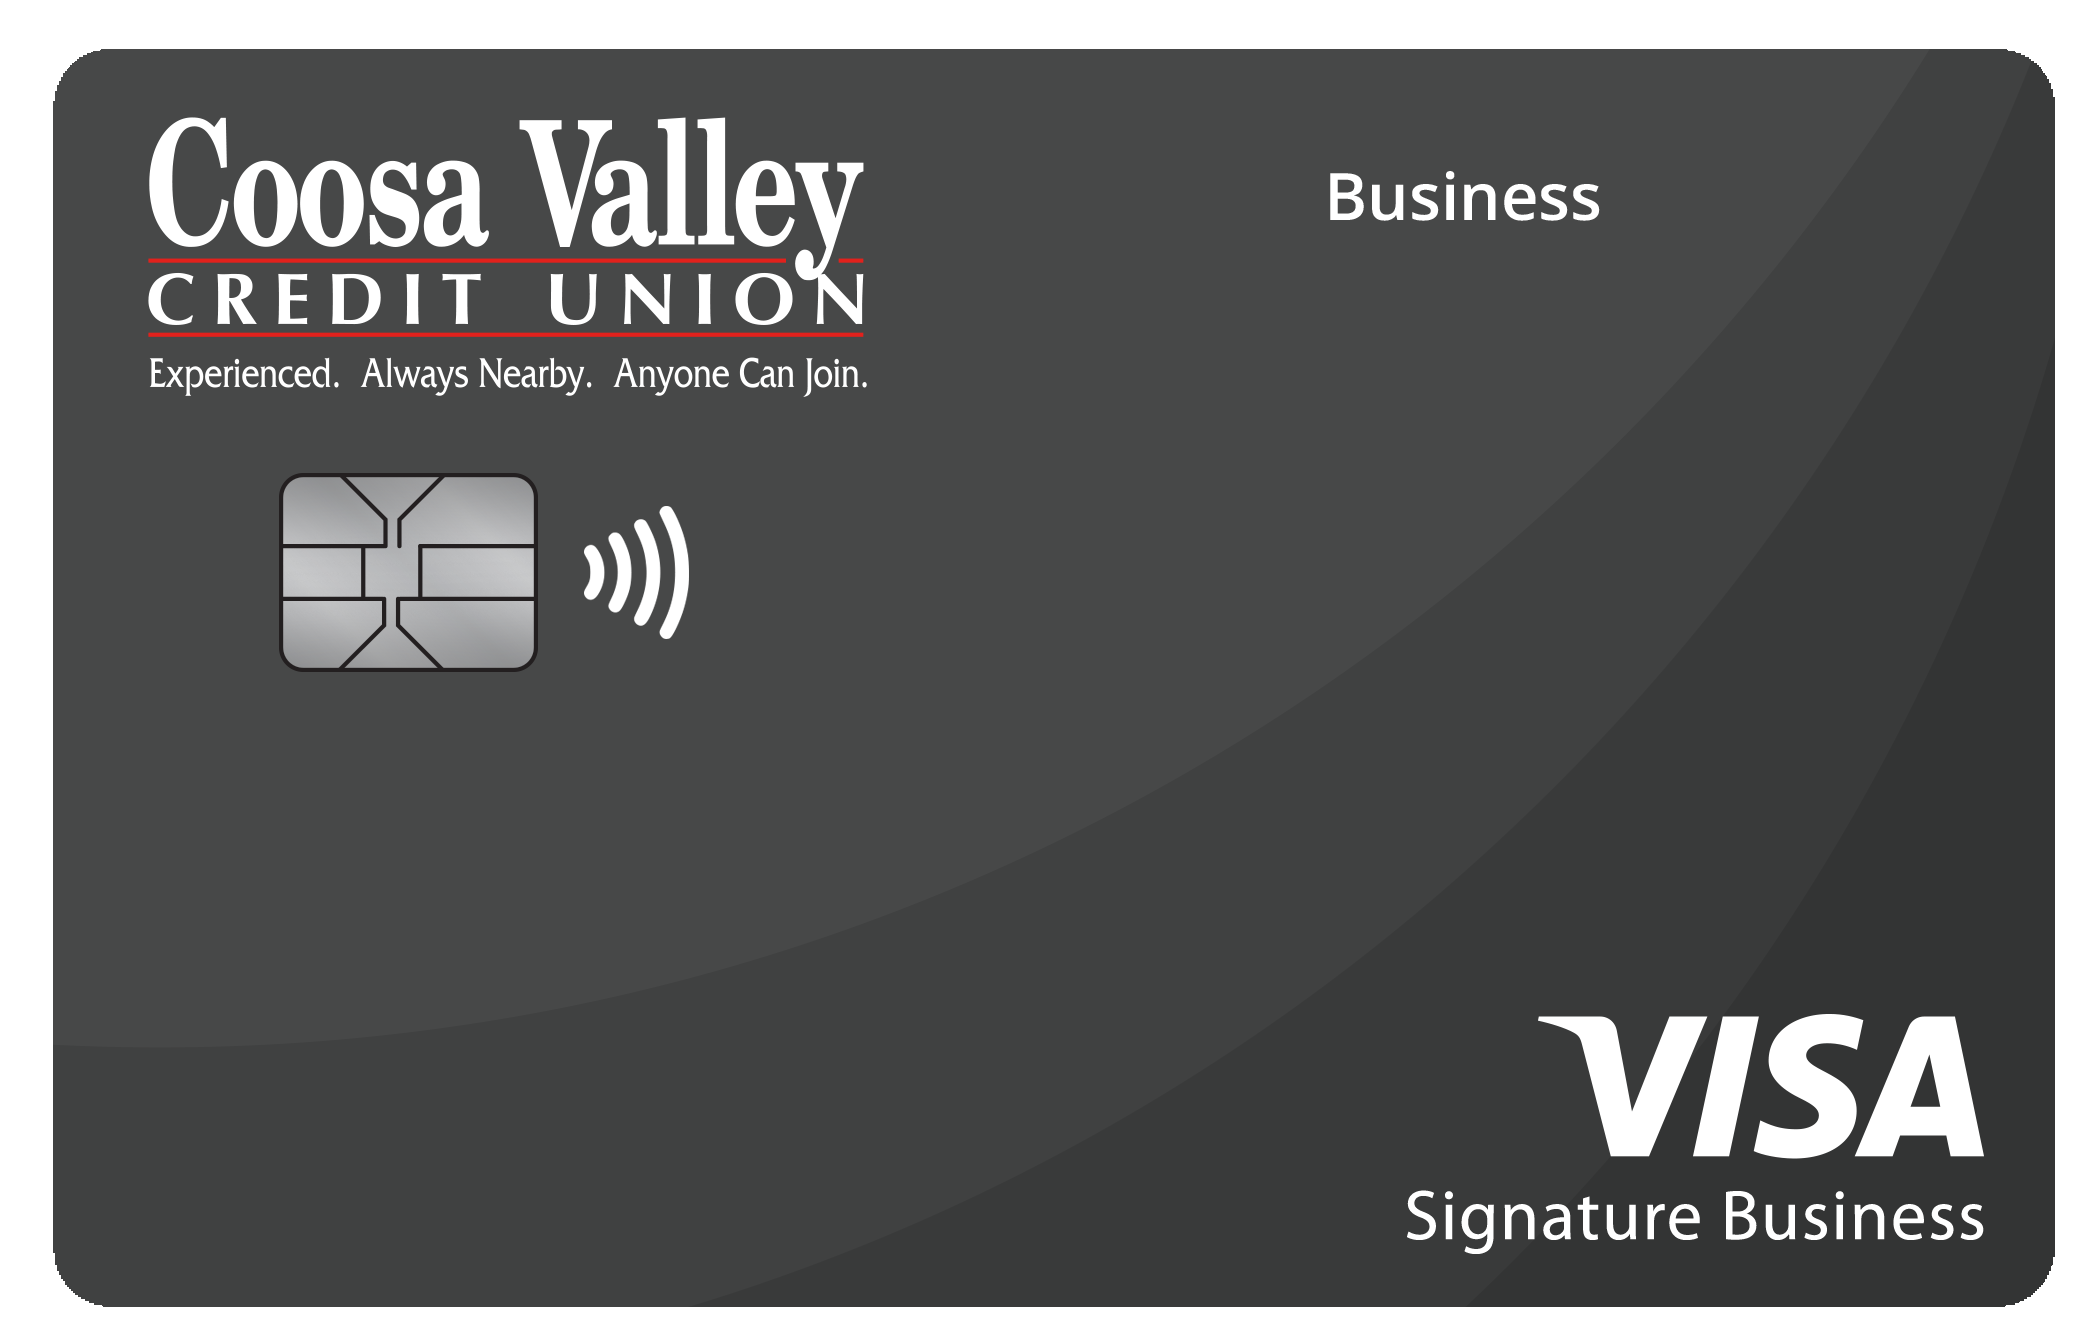 Coosa Valley Credit Union Smart Business Rewards Card